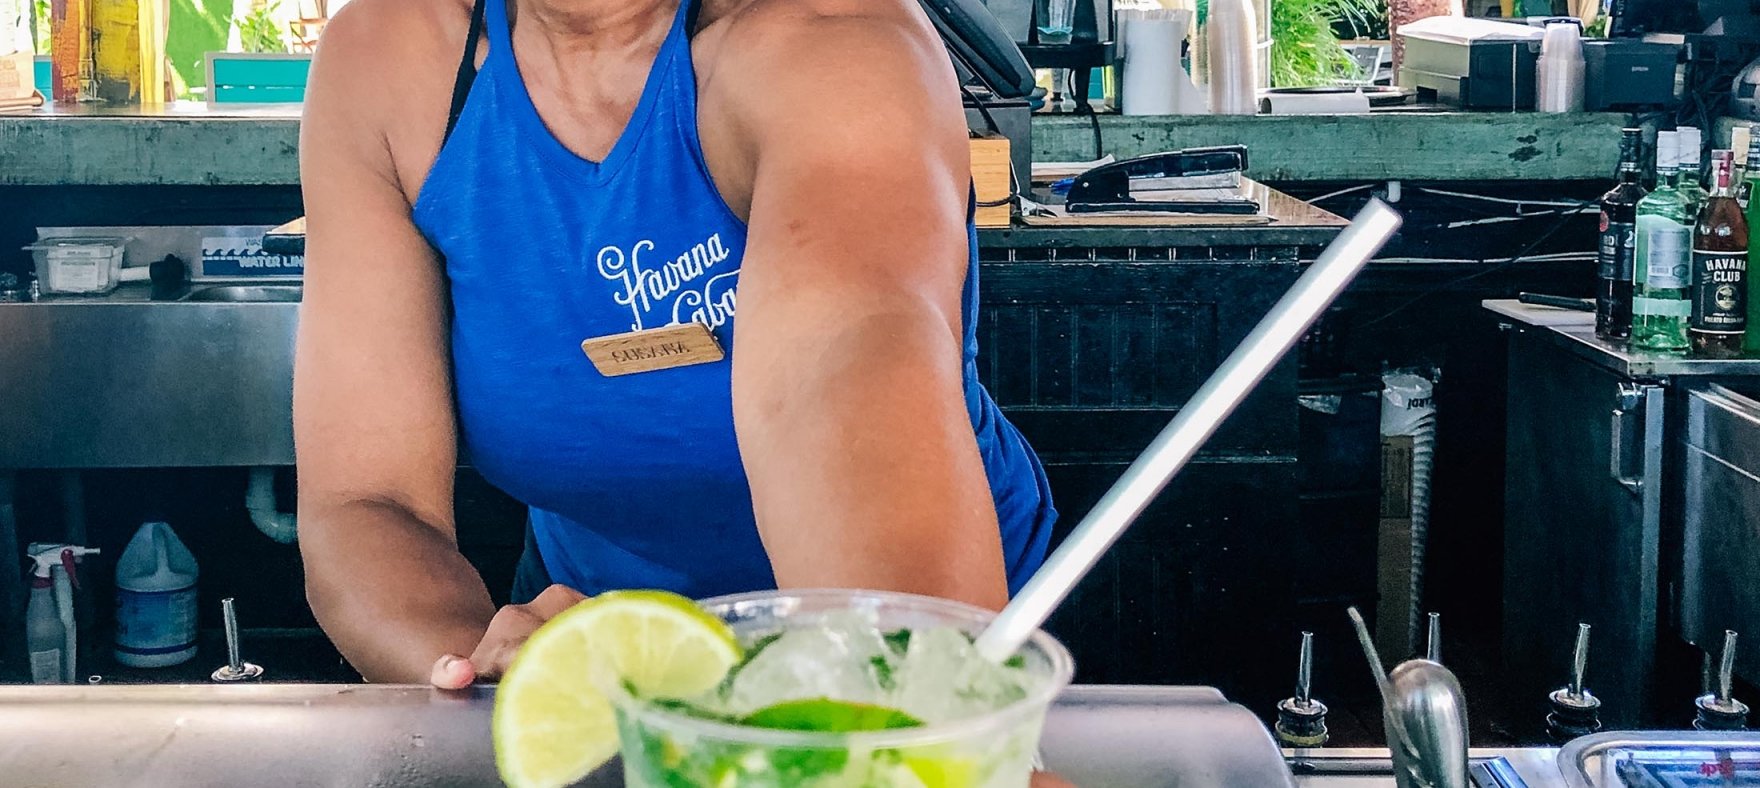 A woman placing a mojito on the counter